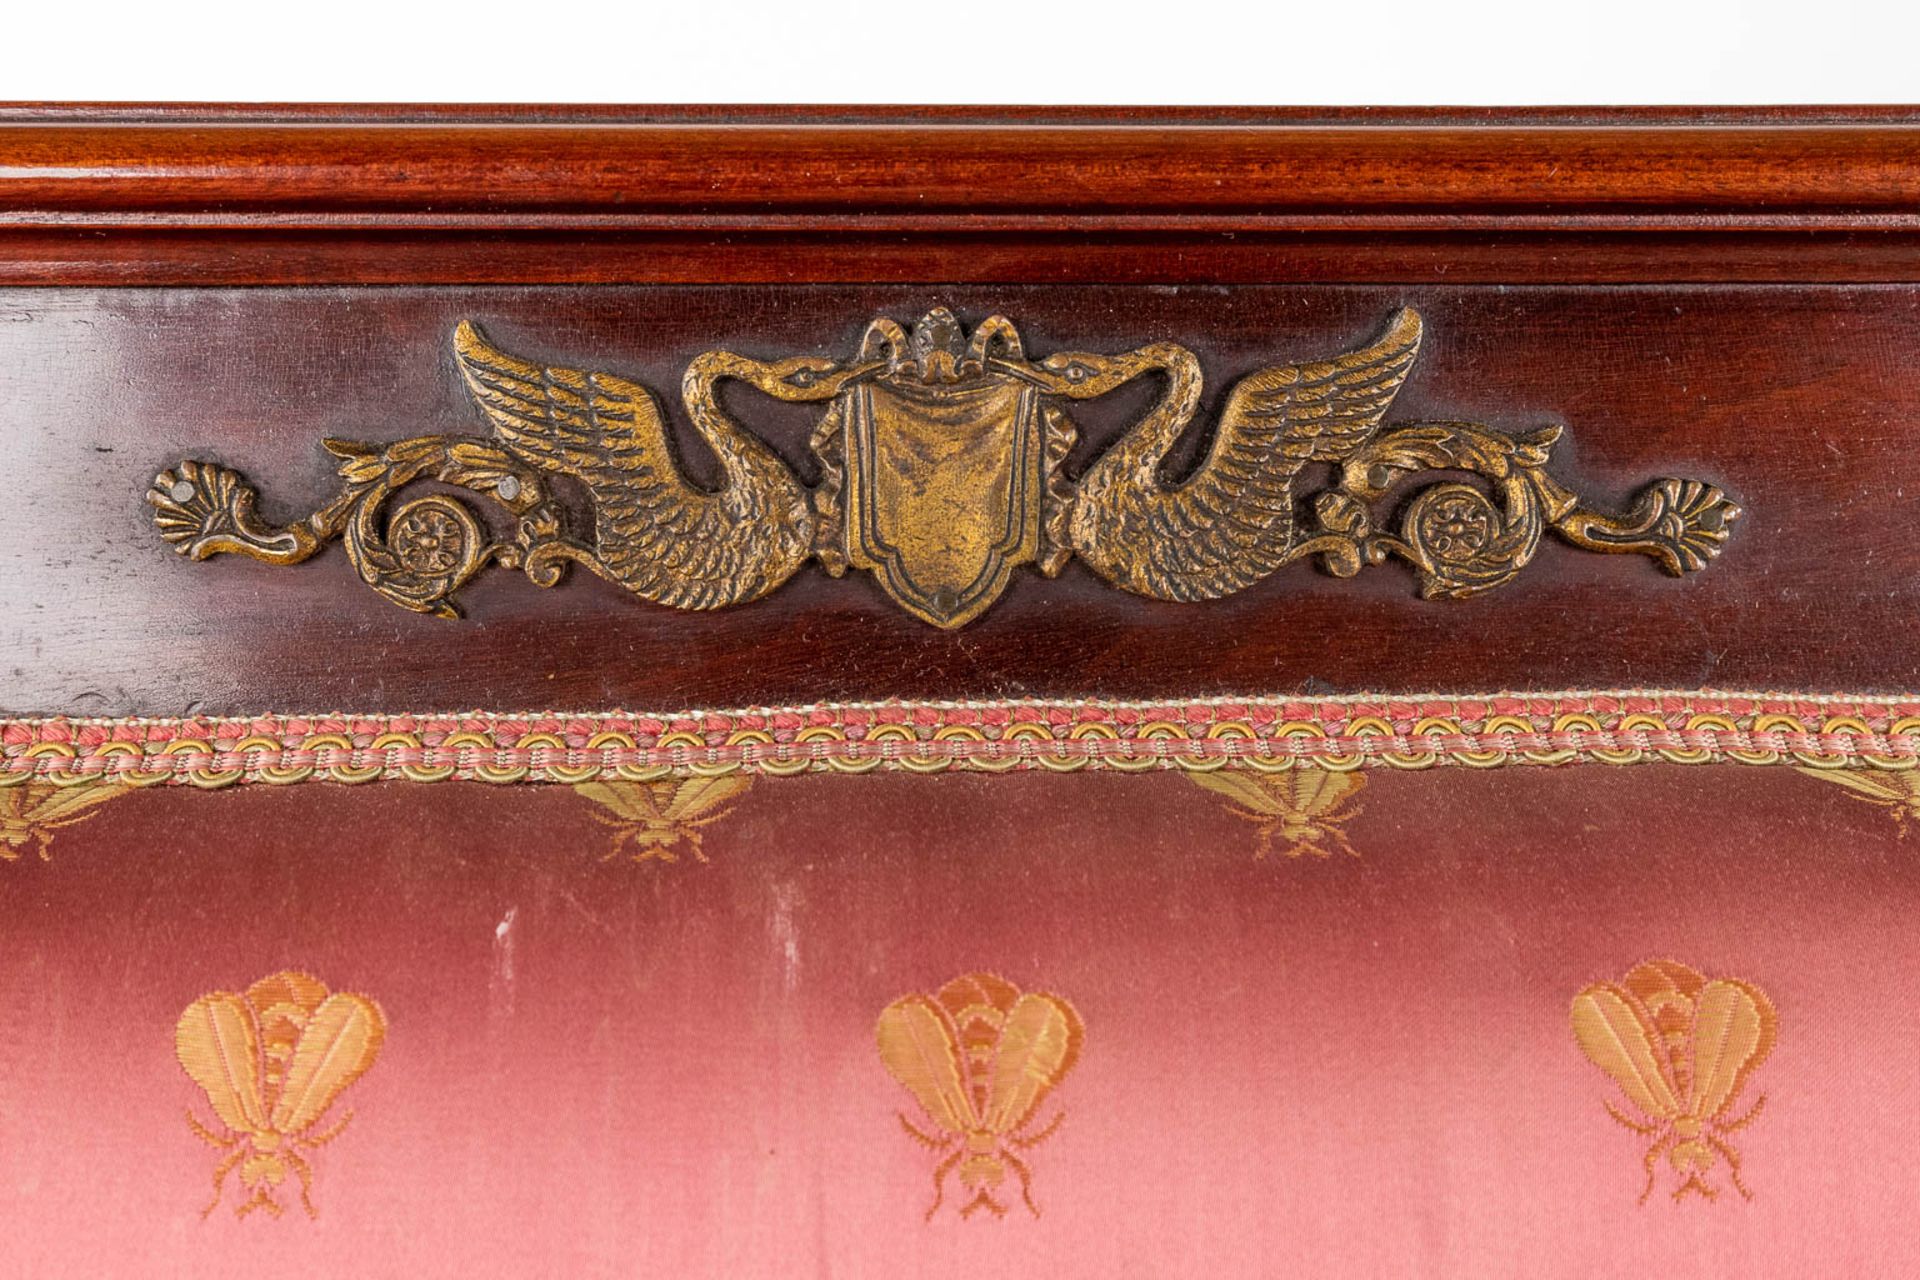 A fine 7-piece salon suite, Empire style, mahogany mounted with bronze. (D:60 x W:130 x H:100 cm) - Image 18 of 25